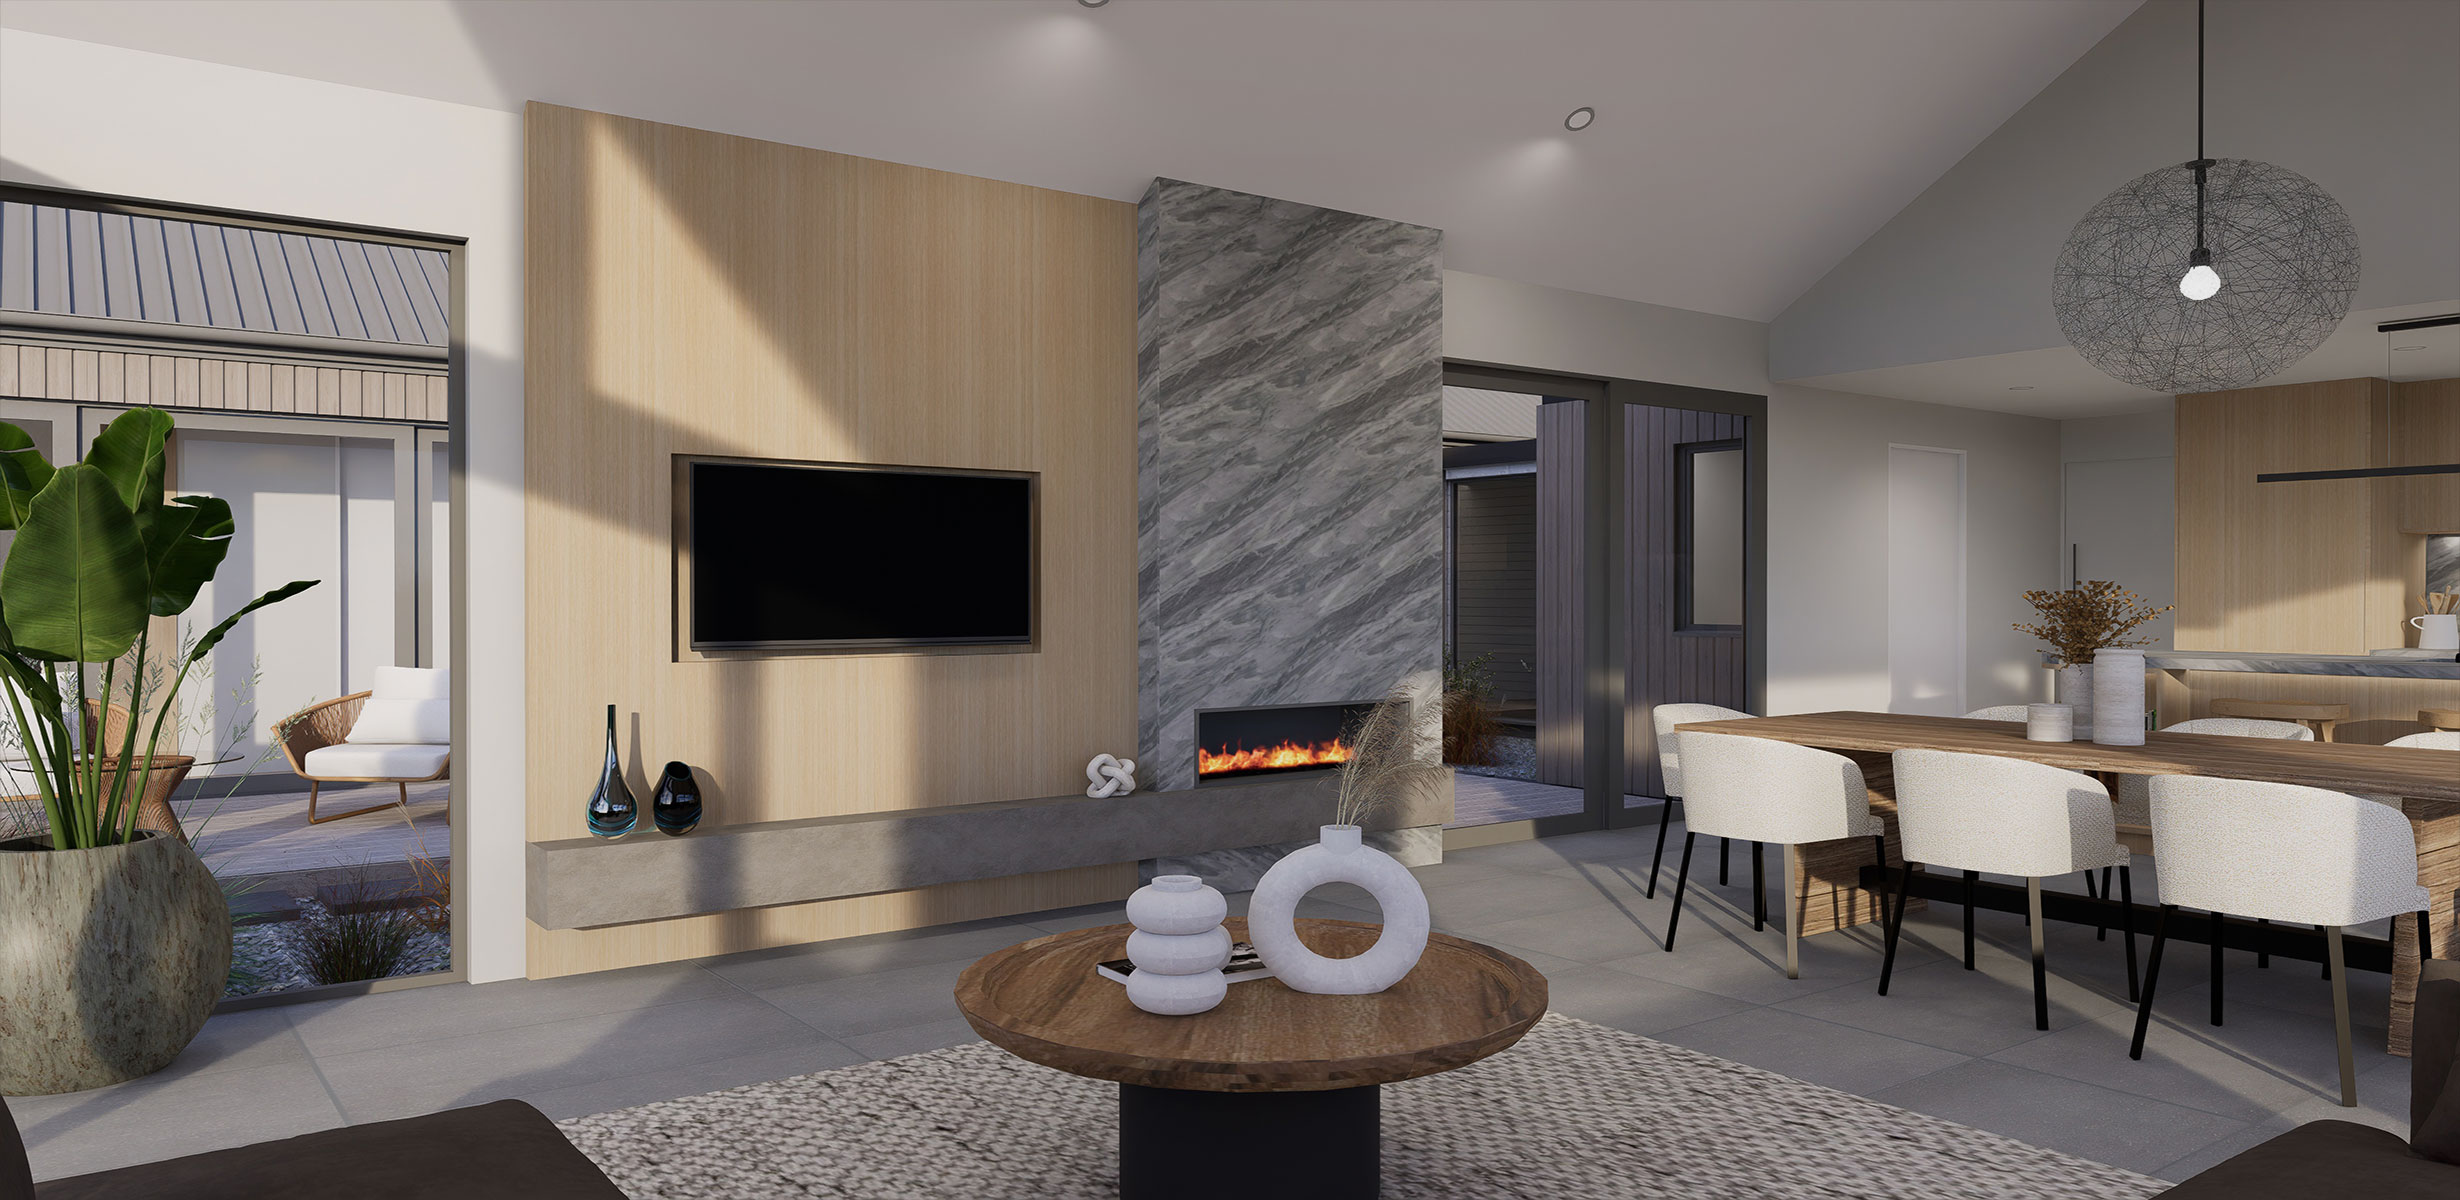 Rakaia House Plan Dining & Living Room View NZ - Our spacious open plan design that seamlessly connects living areas and offers stylish functionality. Enjoy ultimate convenience.